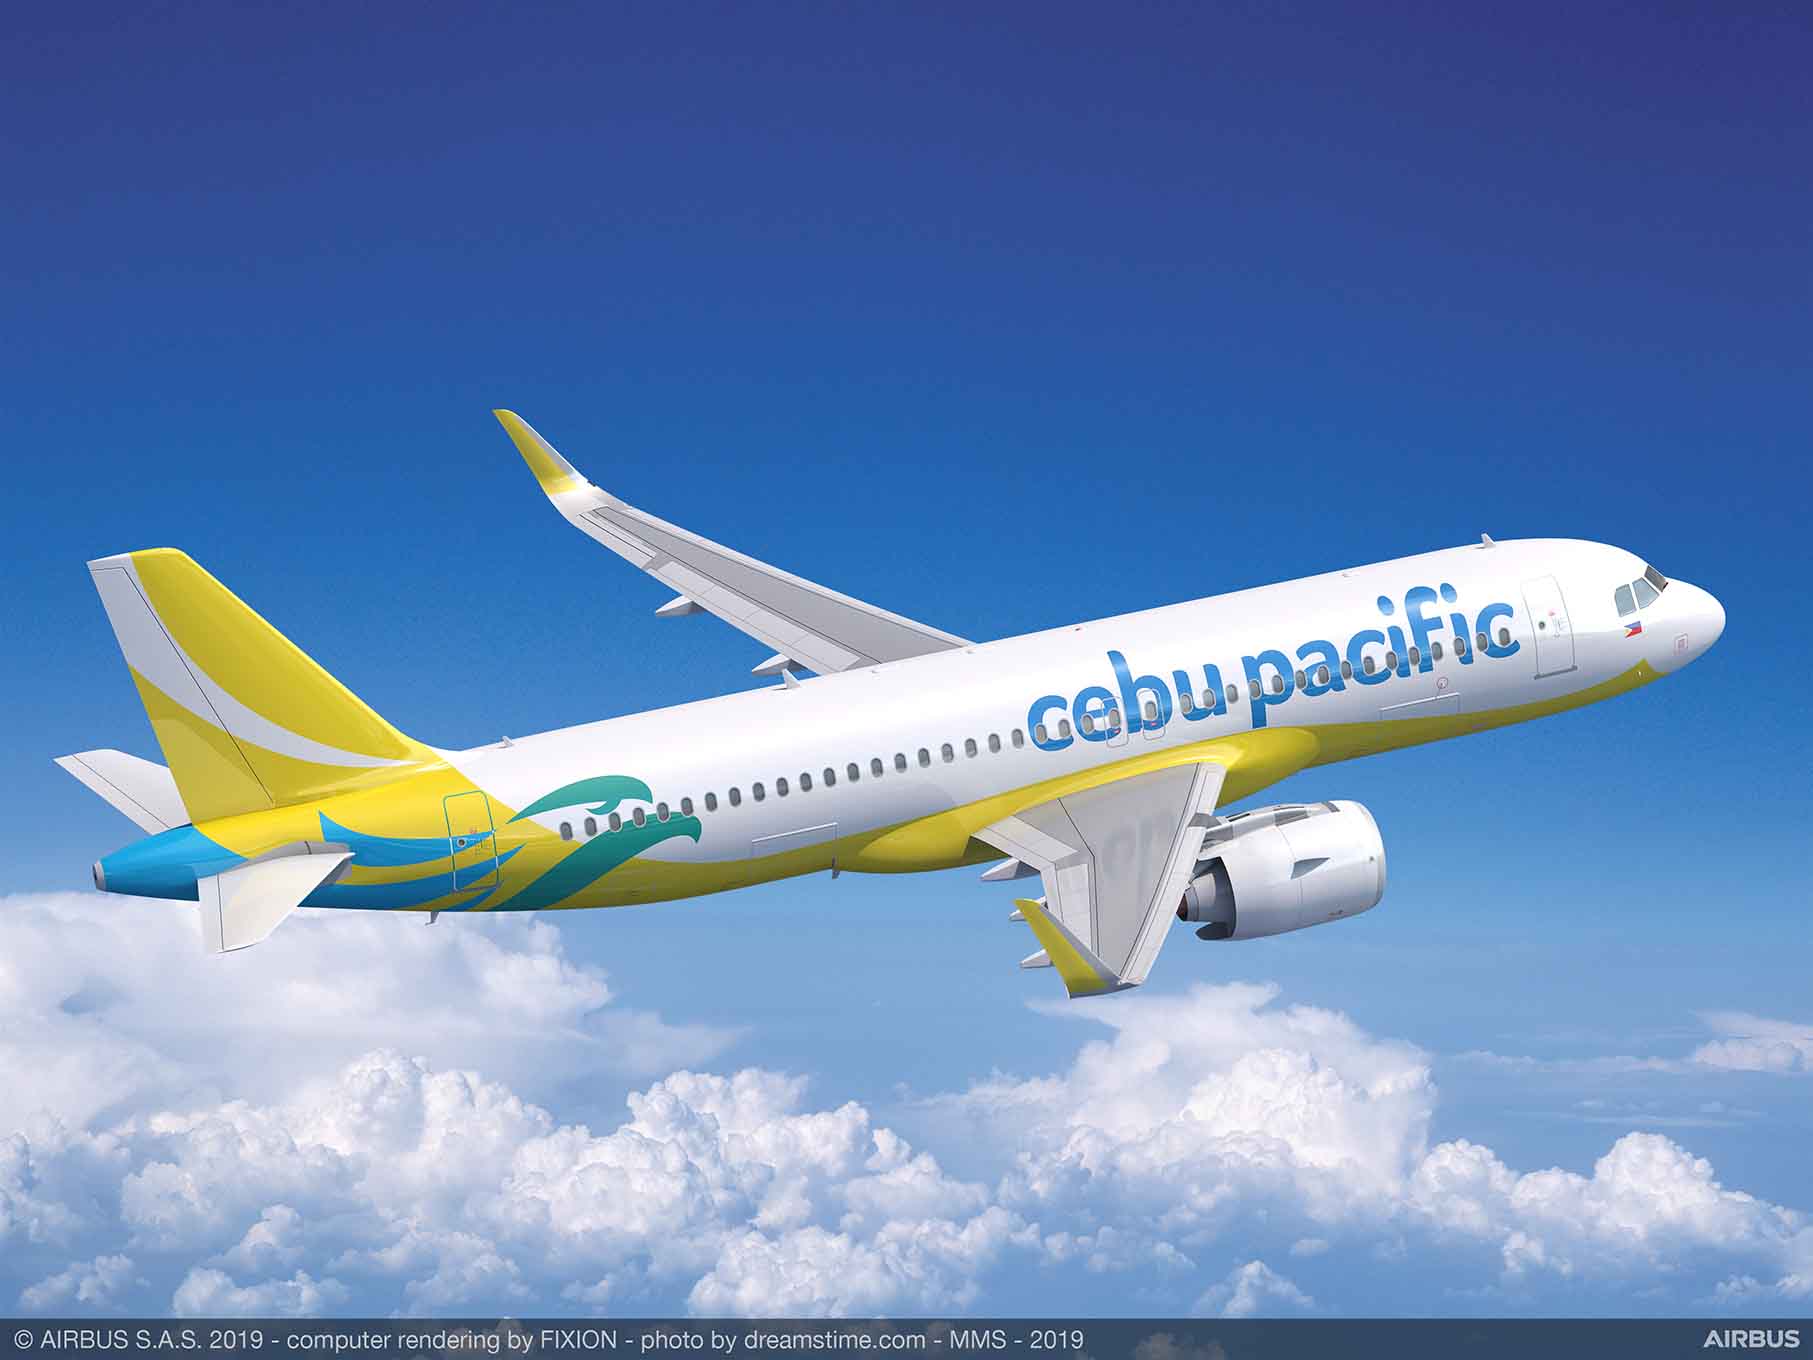 Cebu Pacific signs Airinmar for aircraft warranty and value engineering